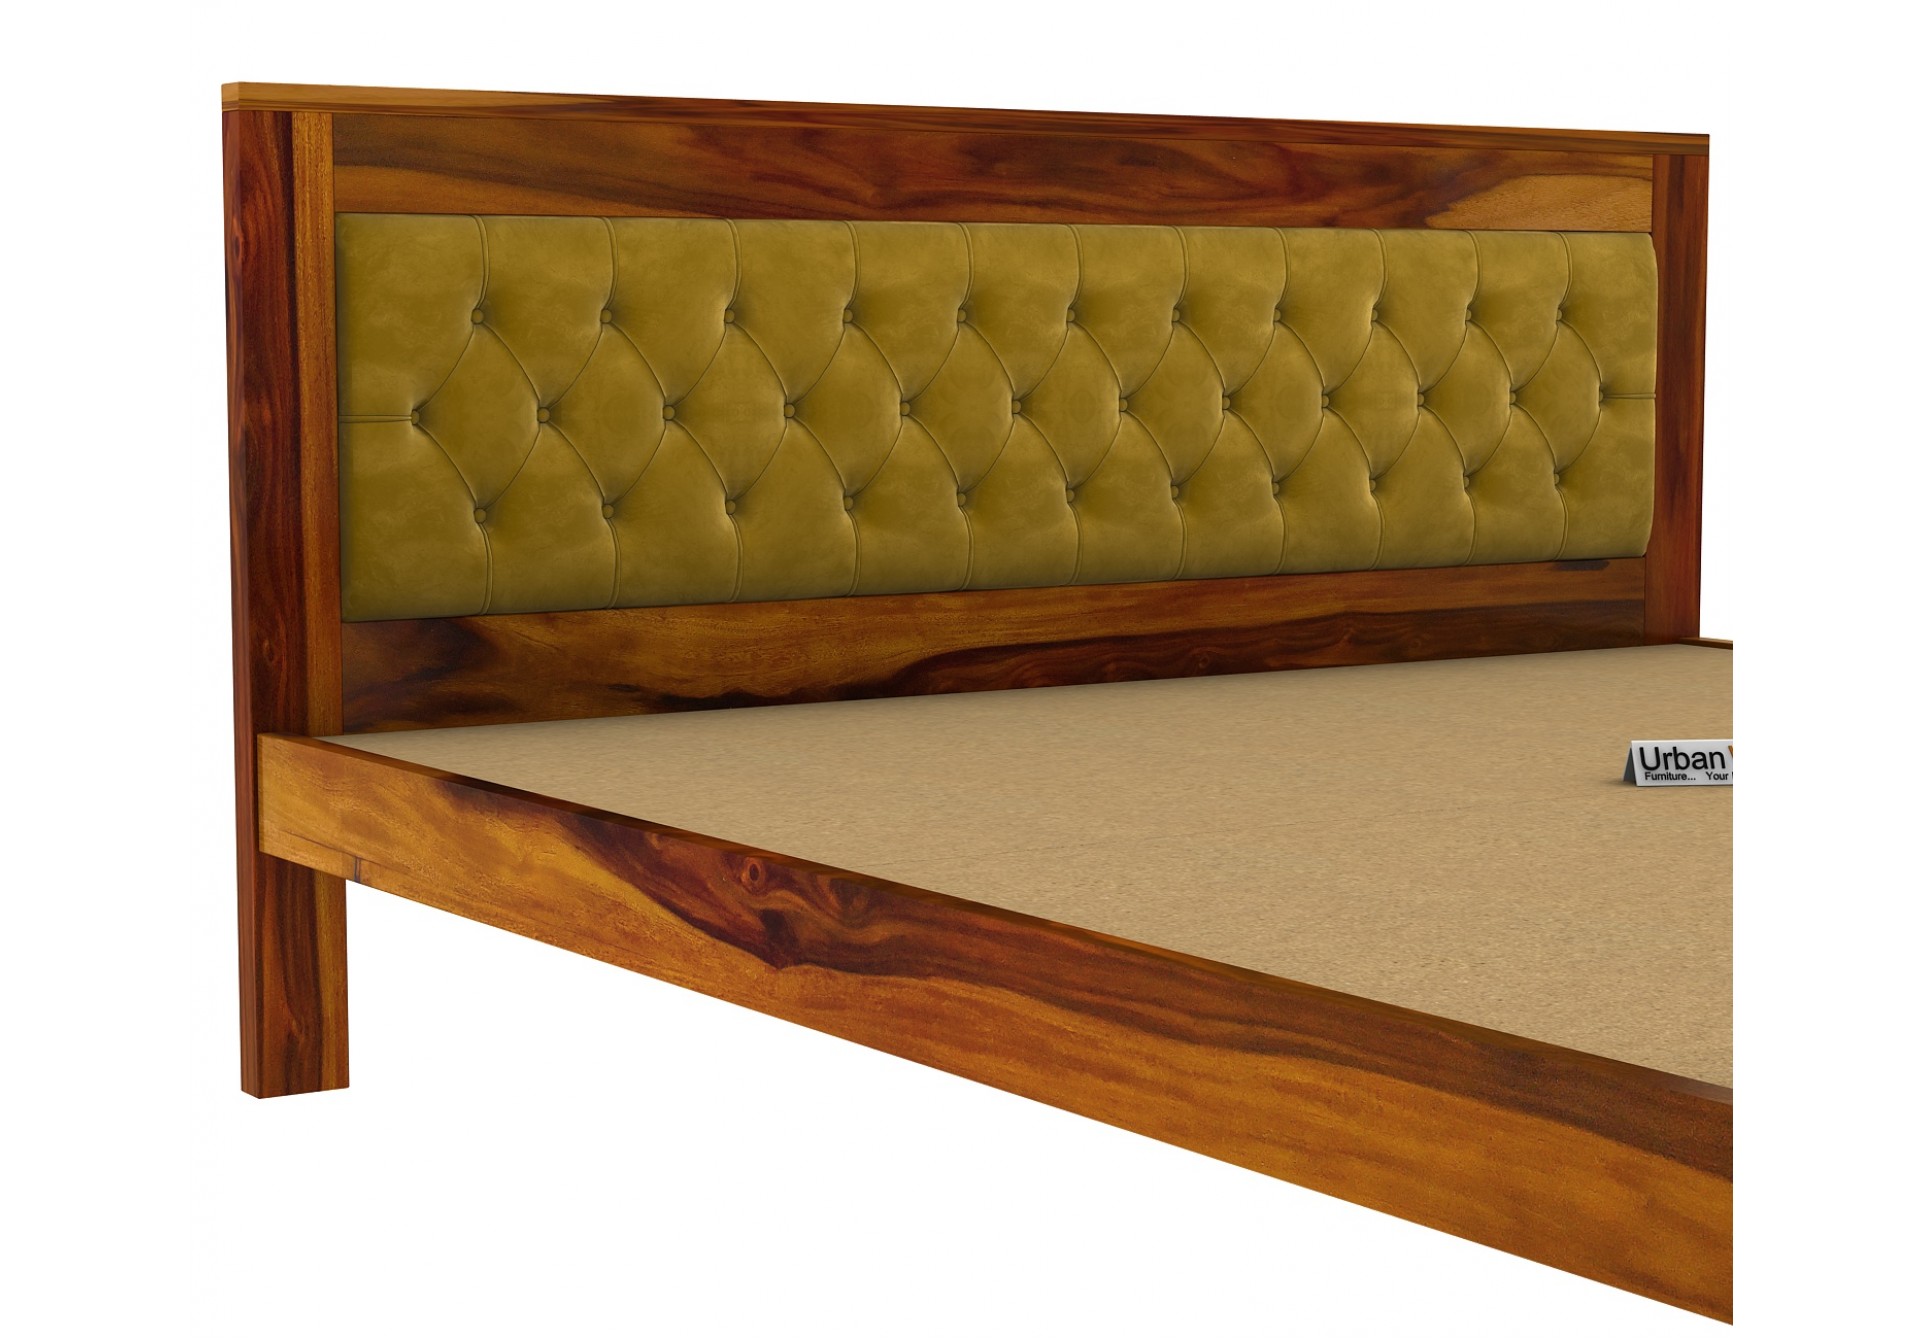 Jolly Wooden Bed without Storage ( Queen Size, Honey Finish )